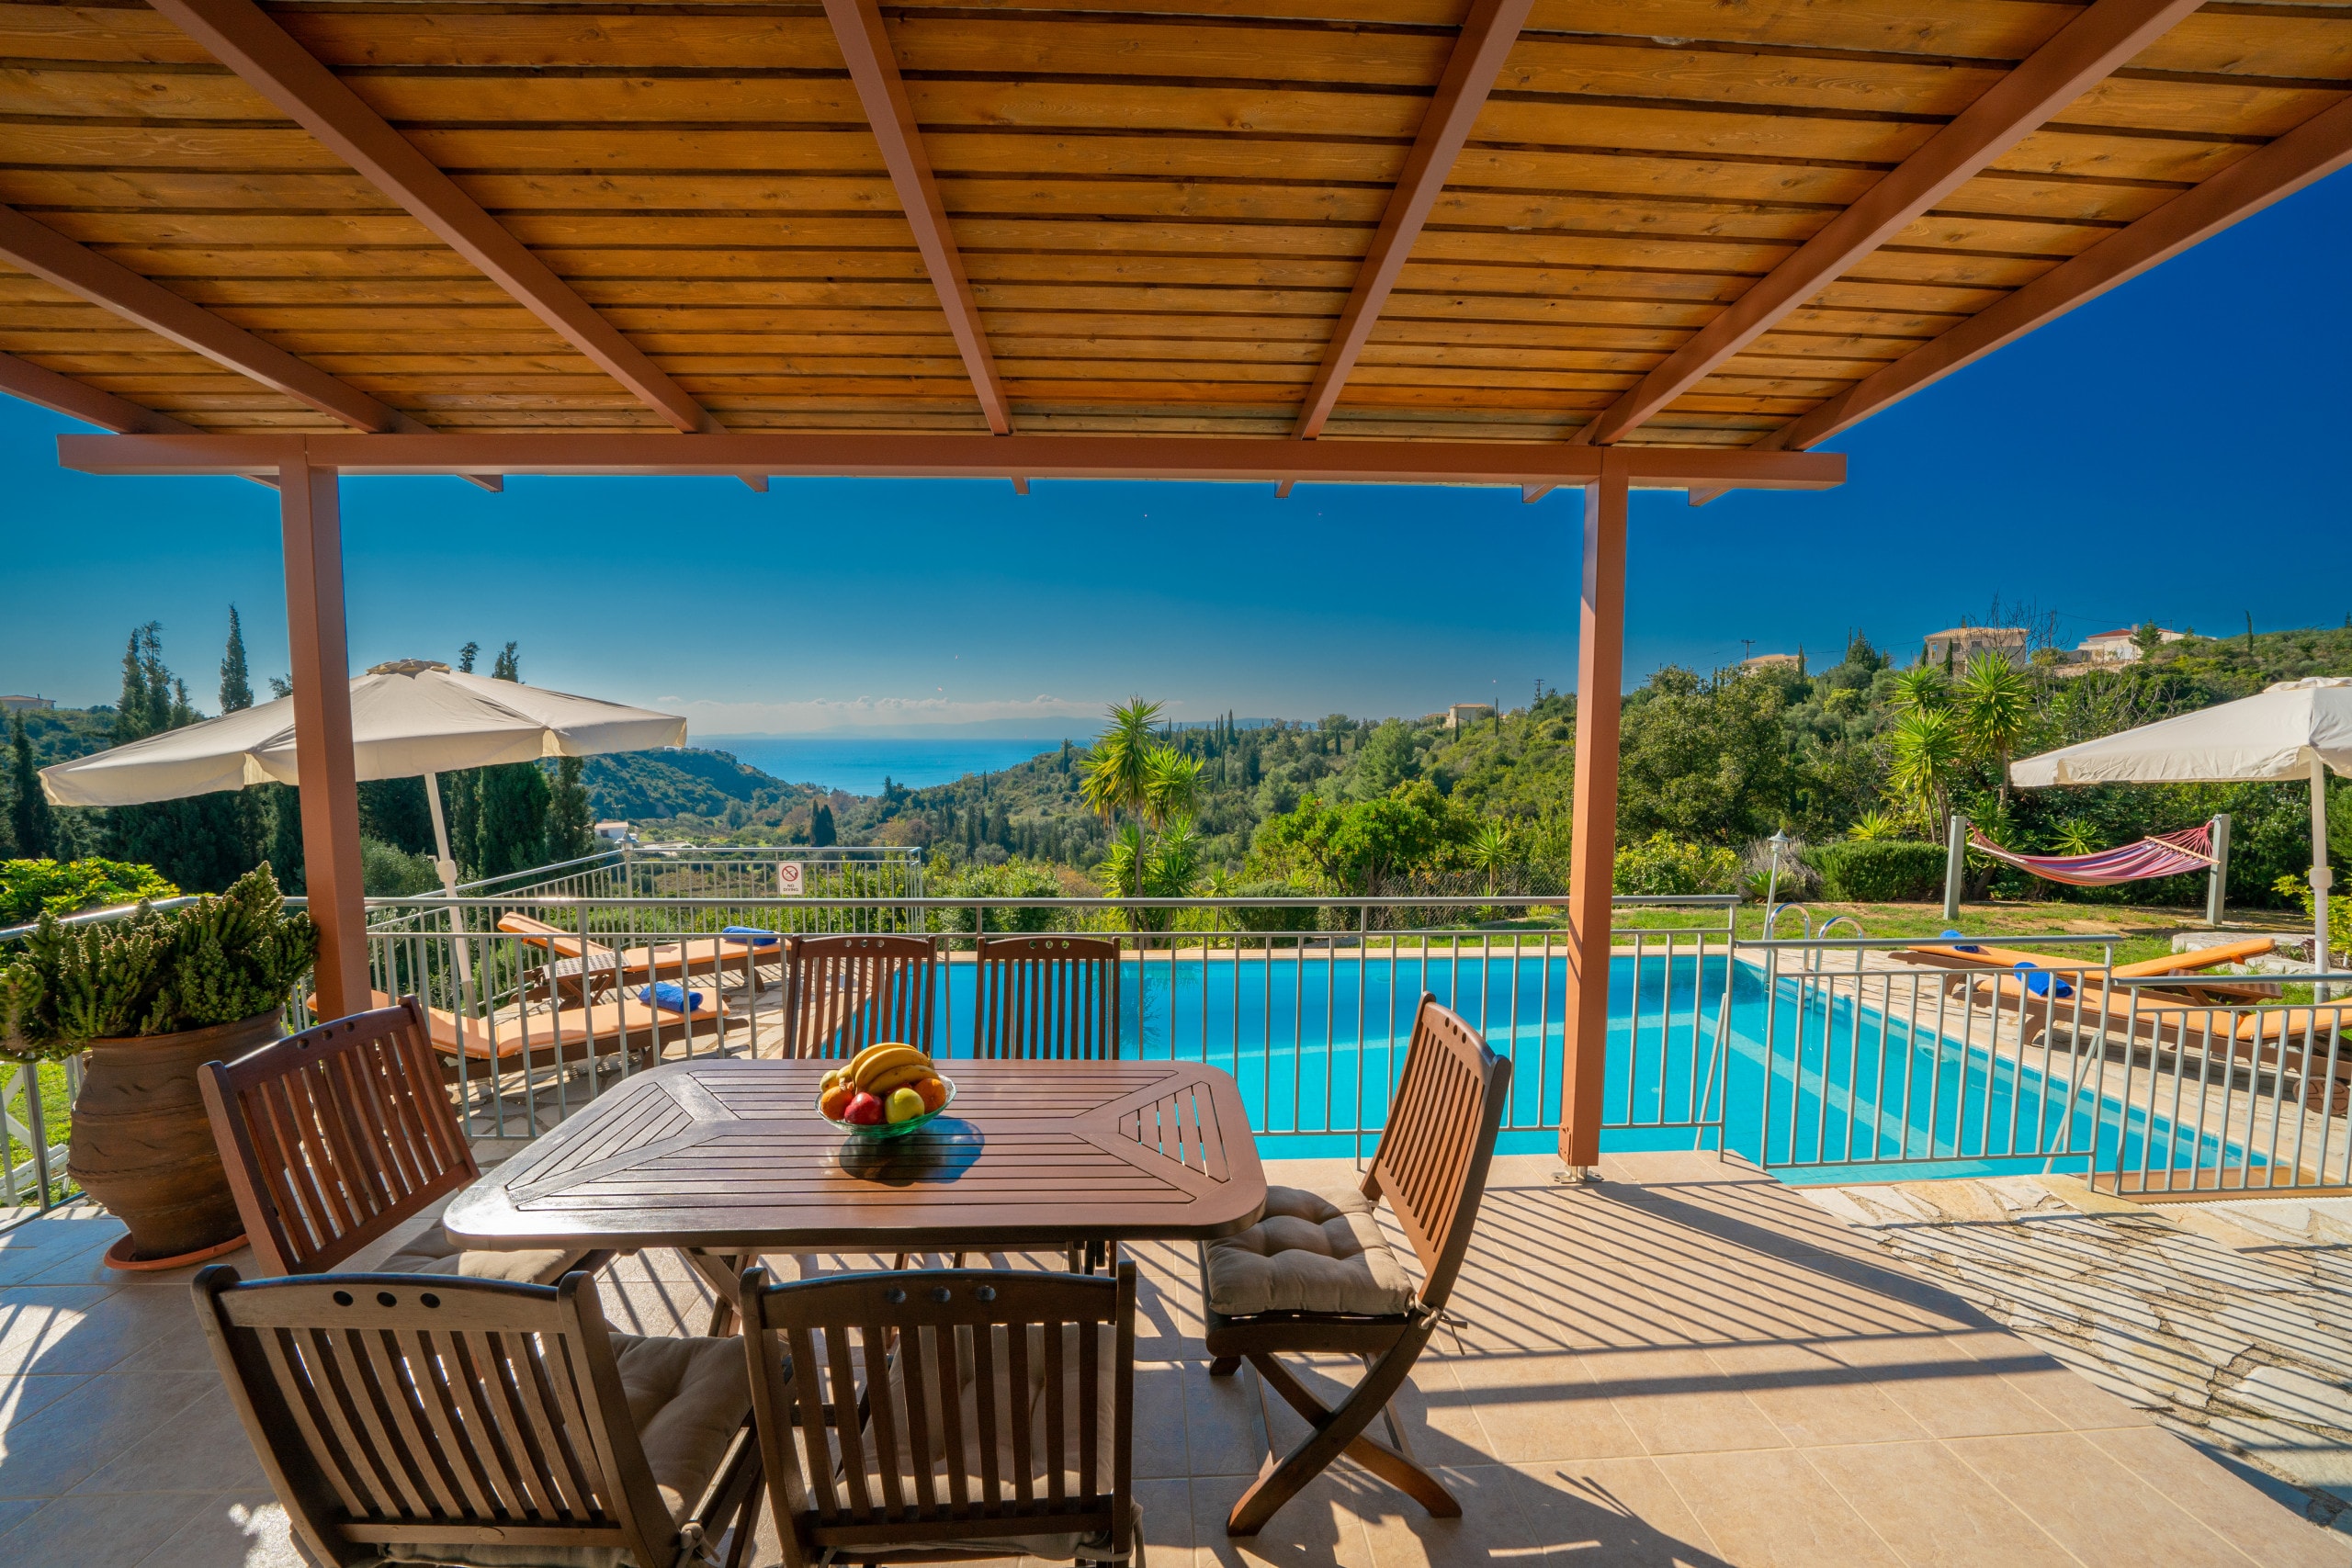 Property Image 2 - Wonderful Stone Built Villa with Infinity Pool and Breathtaking Views